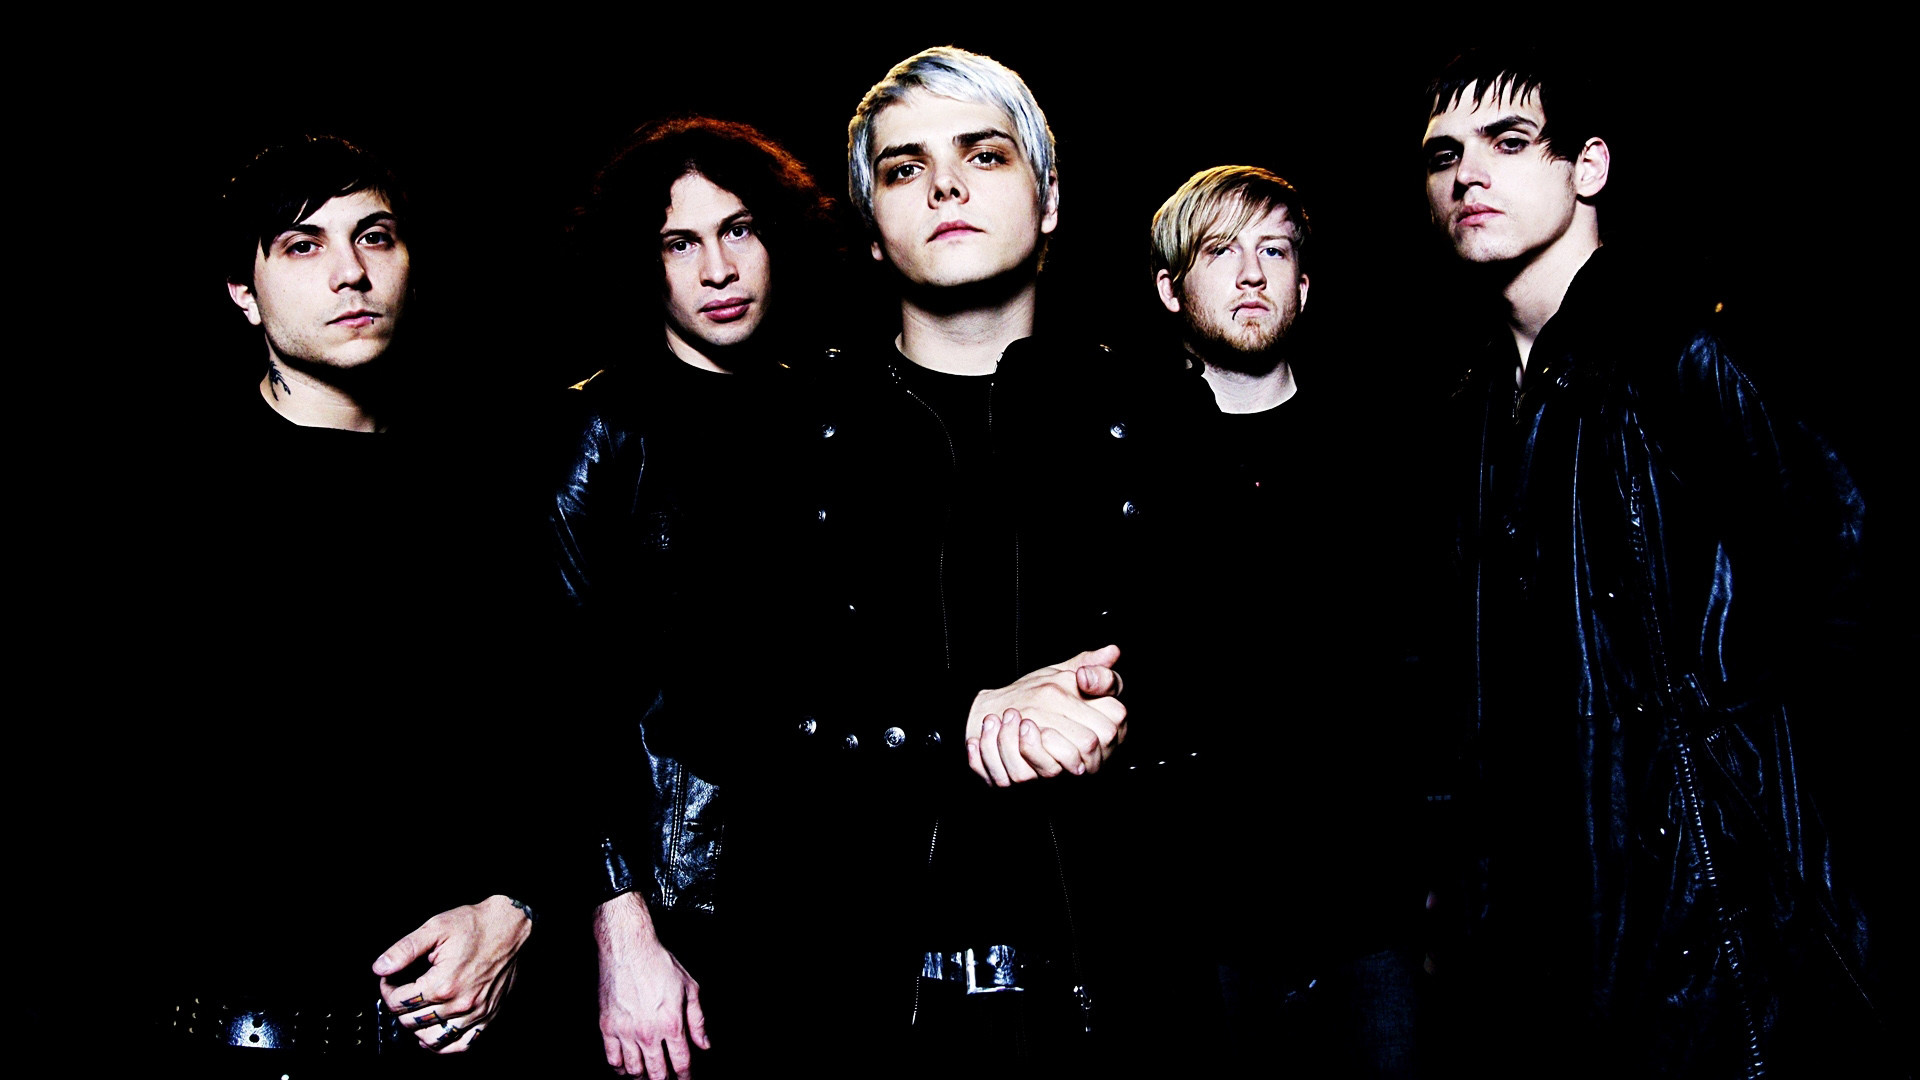 1920x1080 My Chemical Romance images my chemical romance 2 wallpaper HD wallpaper and  background photos